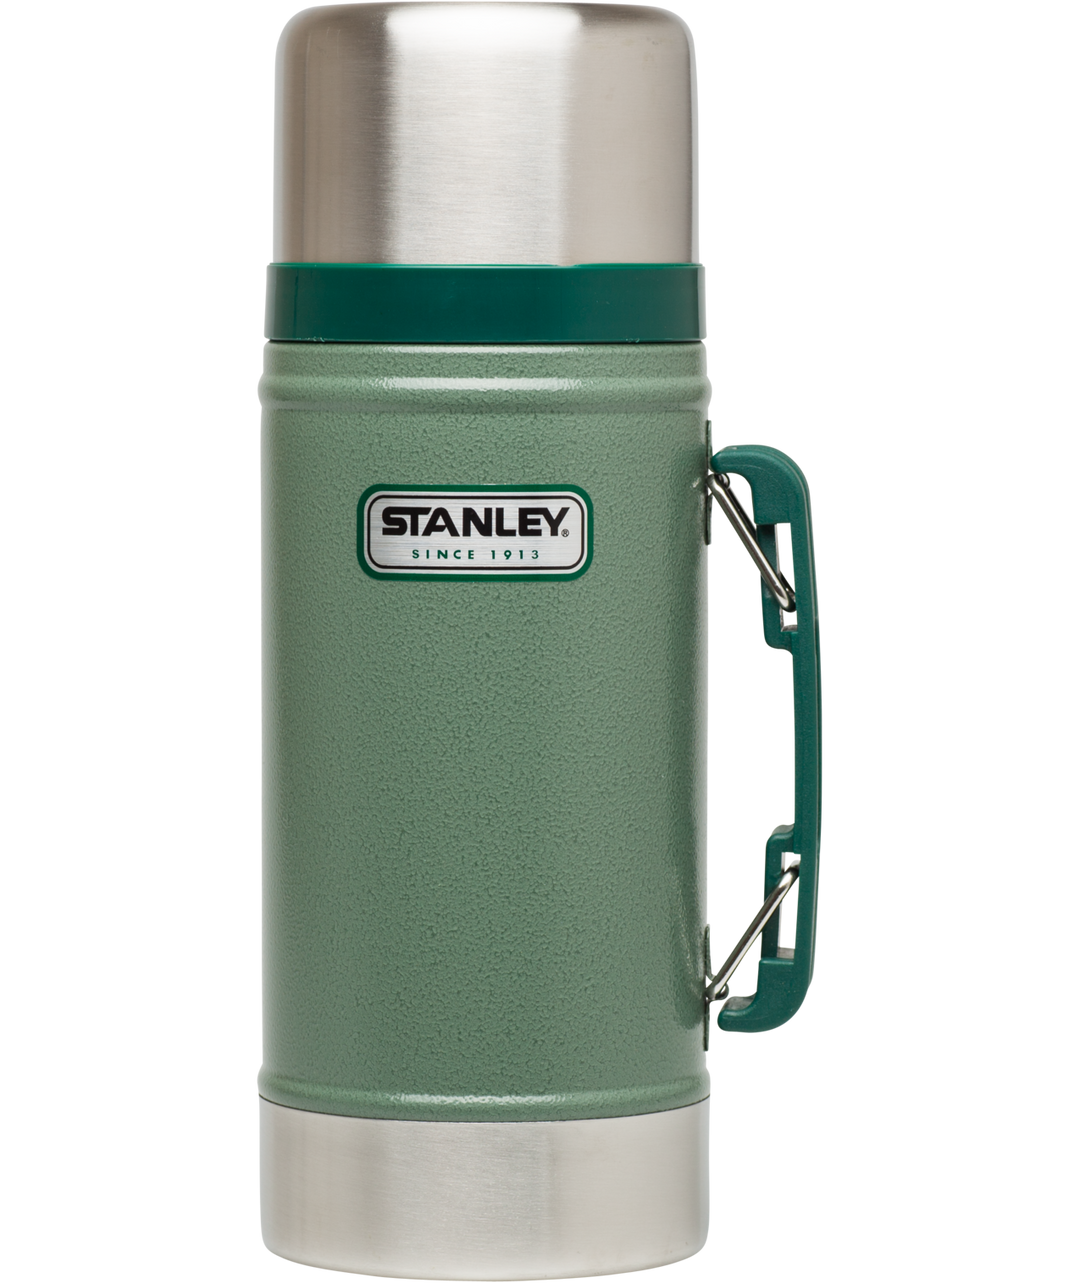 https://www.momjunction.com/wp-content/uploads/product-images/stanley-classic-vacuum-insulated-food-jar_afl385.png